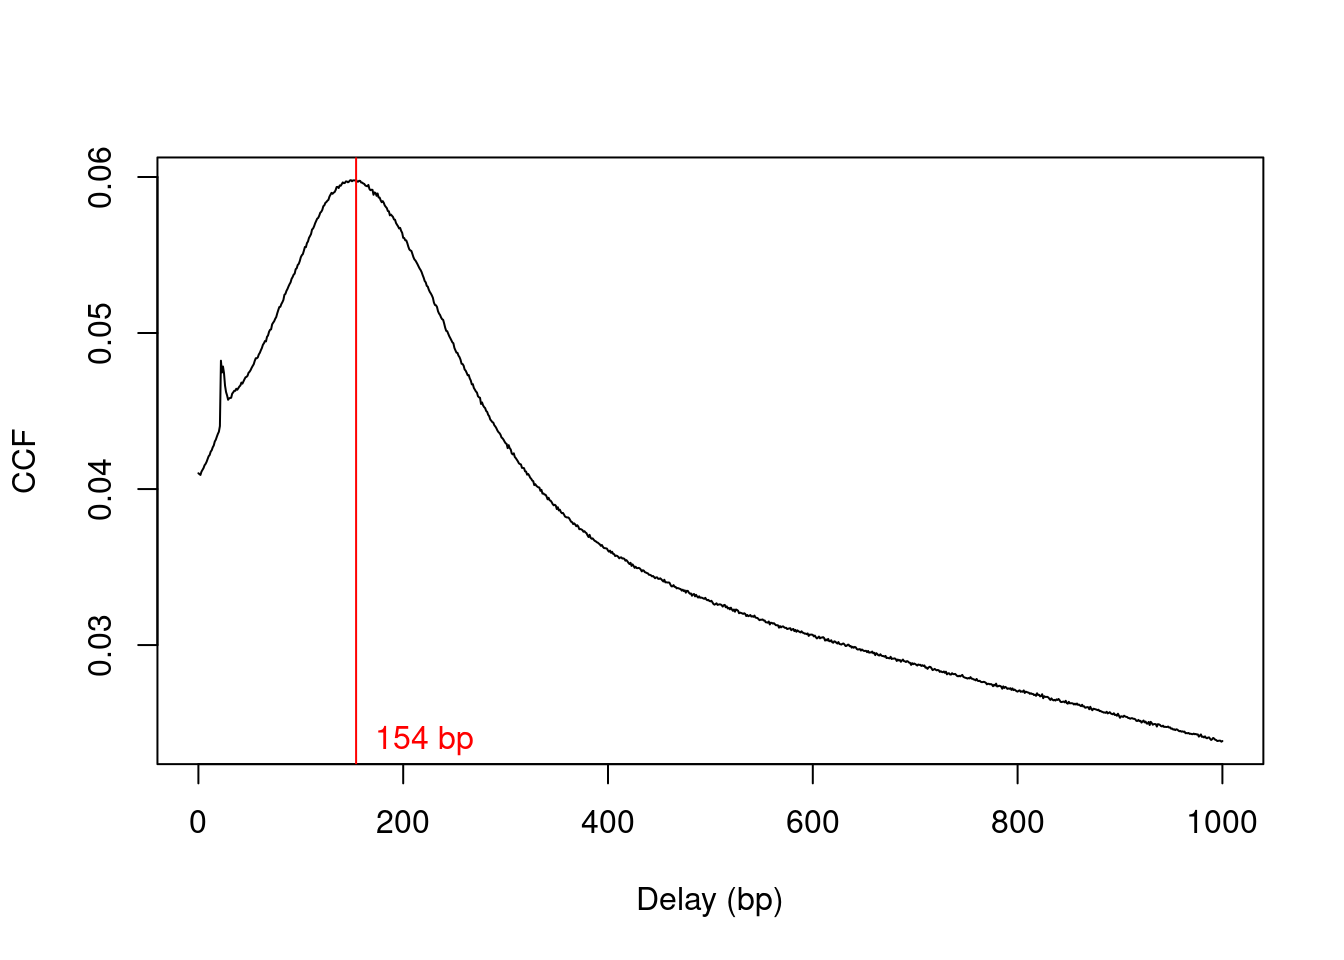 Cross-correlation function (CCF) against delay distance for the H3K9ac data set. The delay with the maximum correlation is shown as the red line.